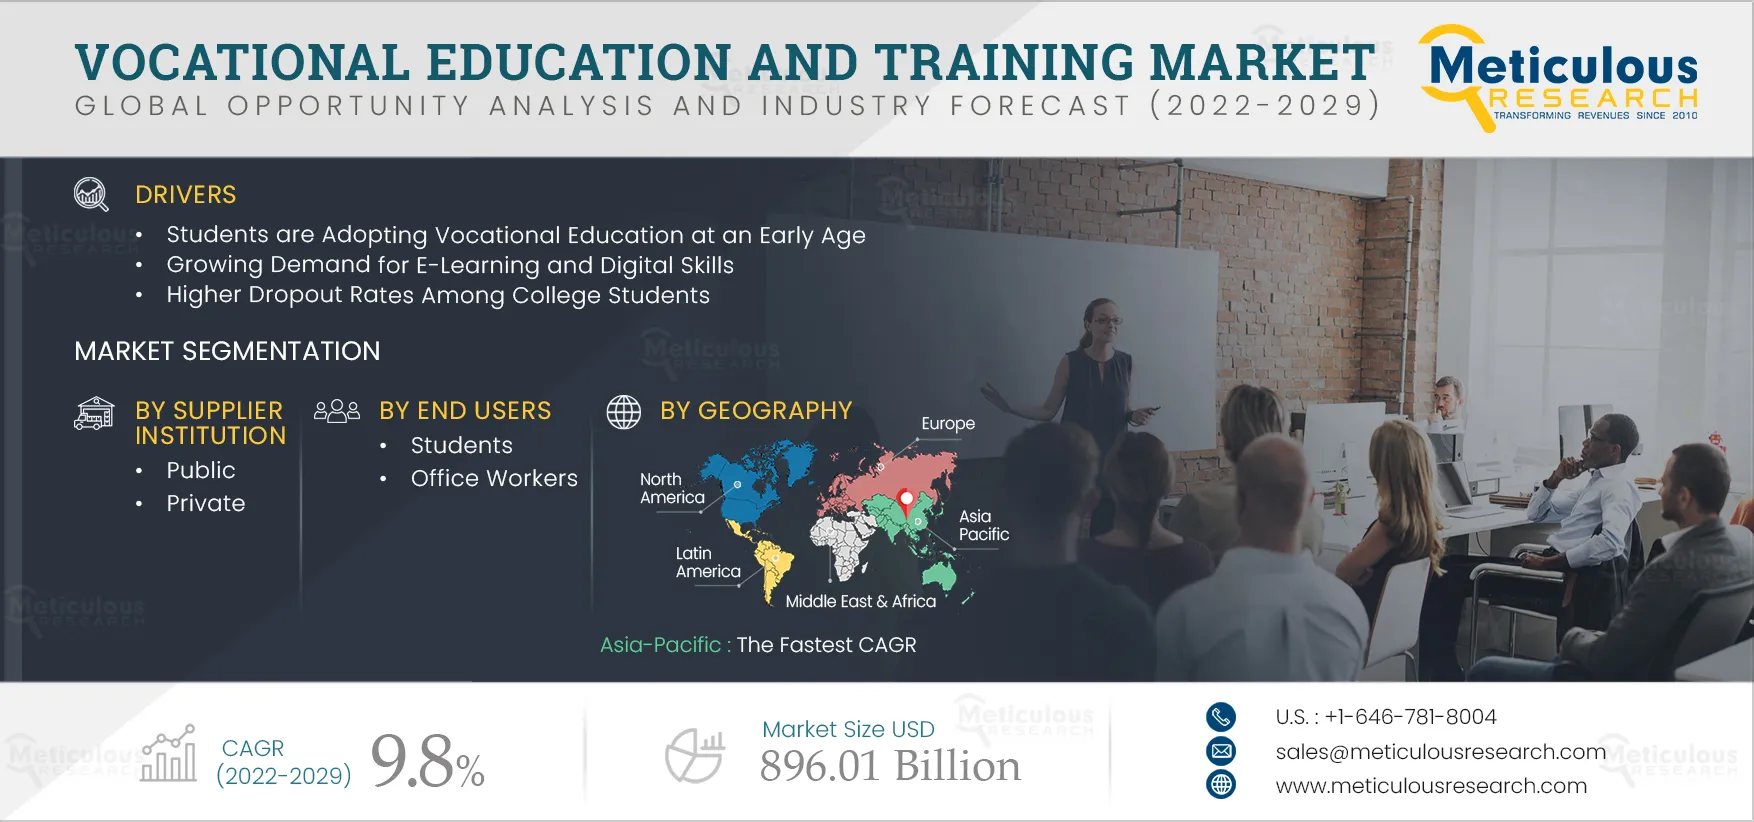 Vocational Education and Training Market